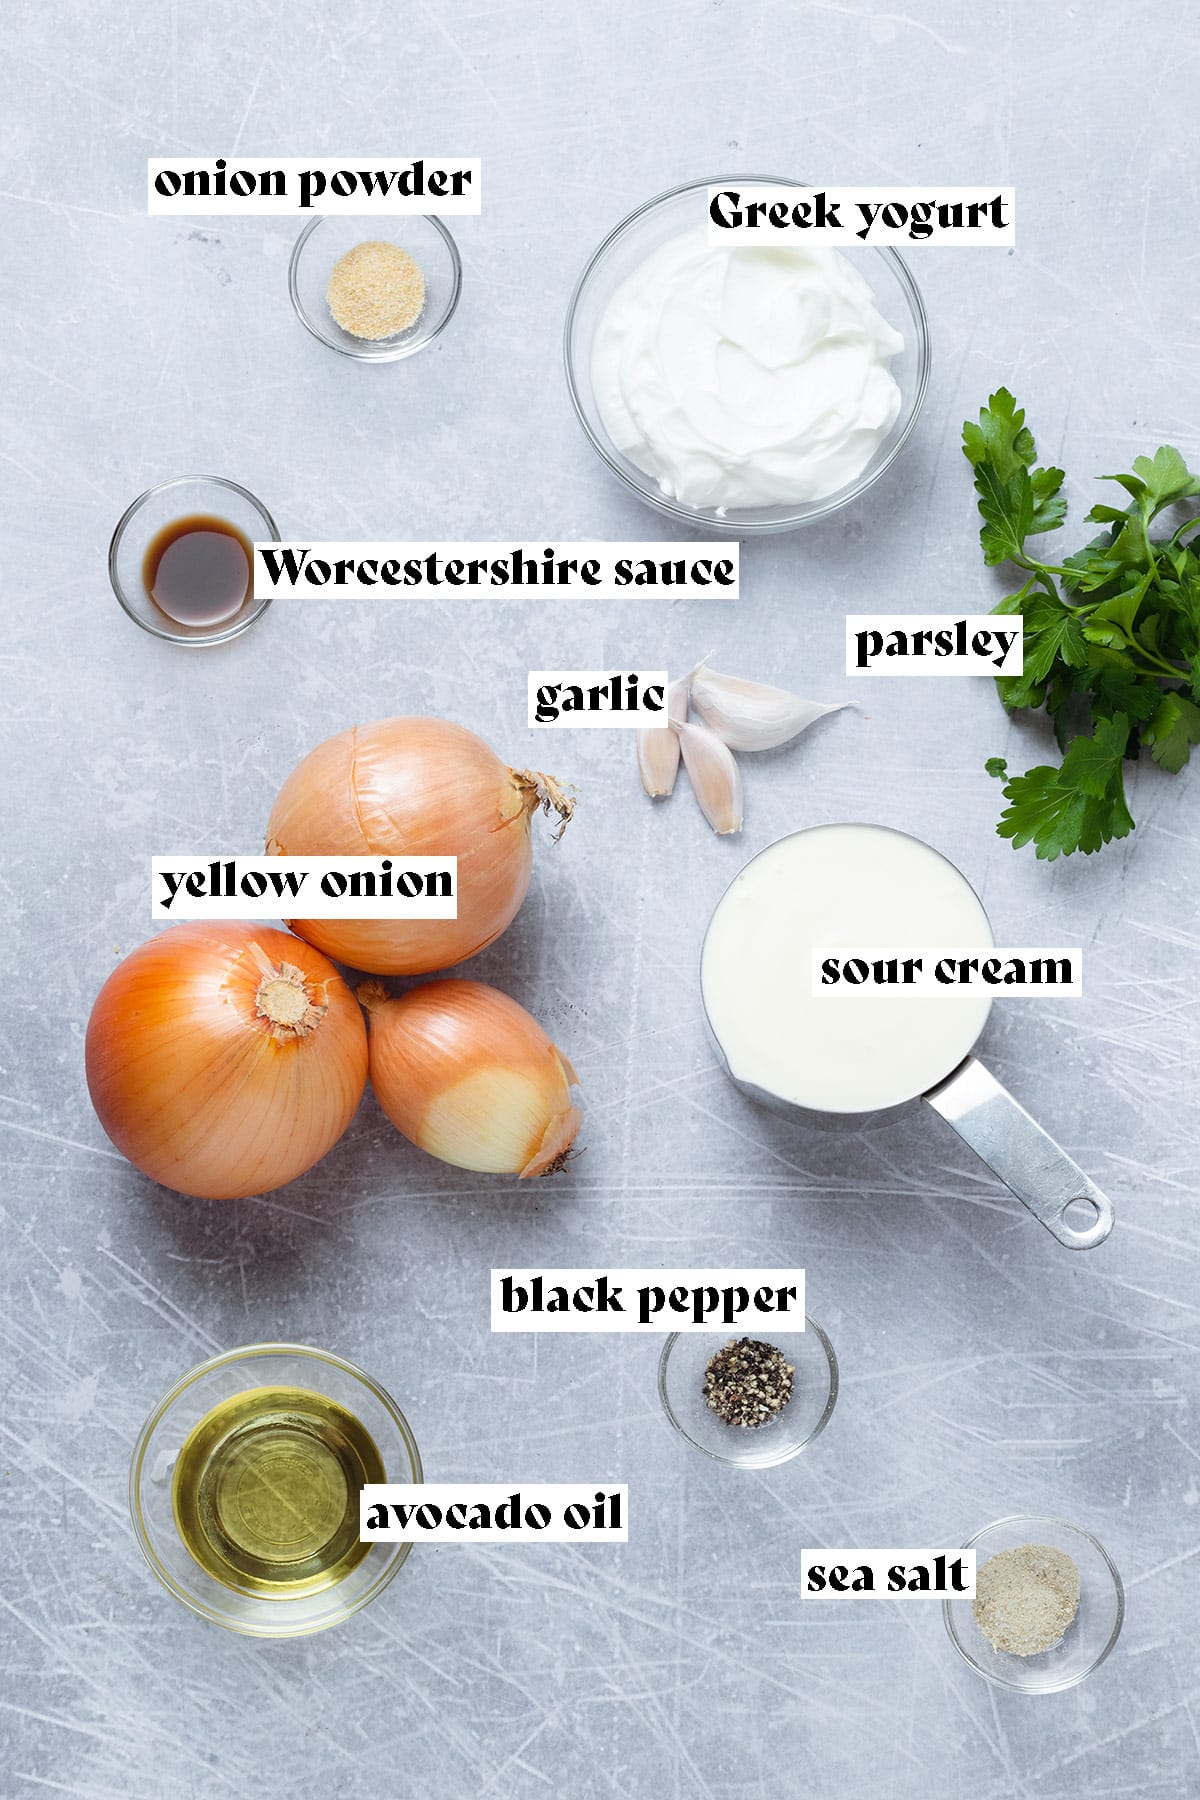 Onions, garlic, Greek yogurt, sour cream, fresh parsley, and other ingredients laid out on a grey background.